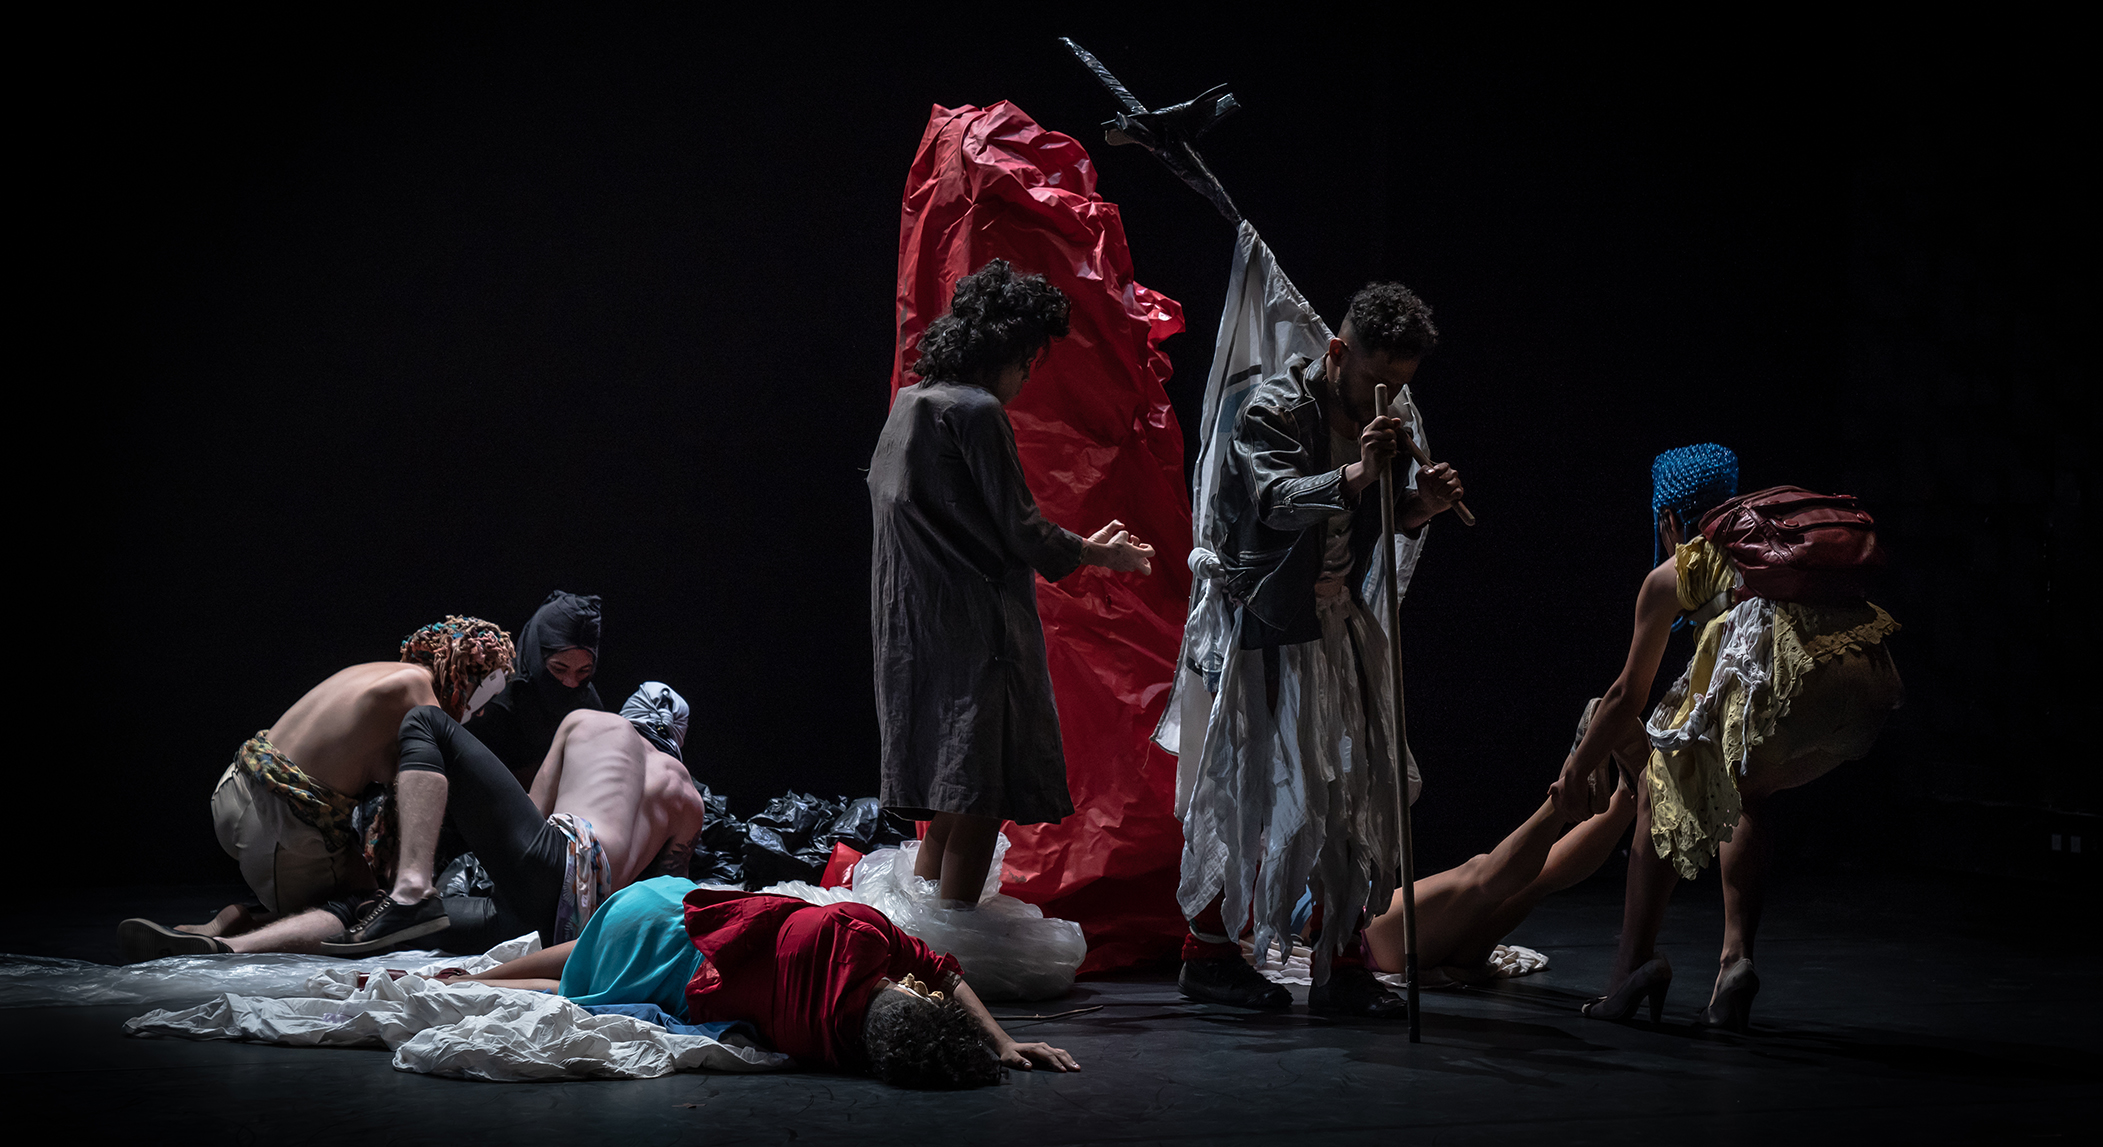 Performers draped in various plastics and fabric are strewn across the stage. Some are lying down, some are walking, and others are being dragged.